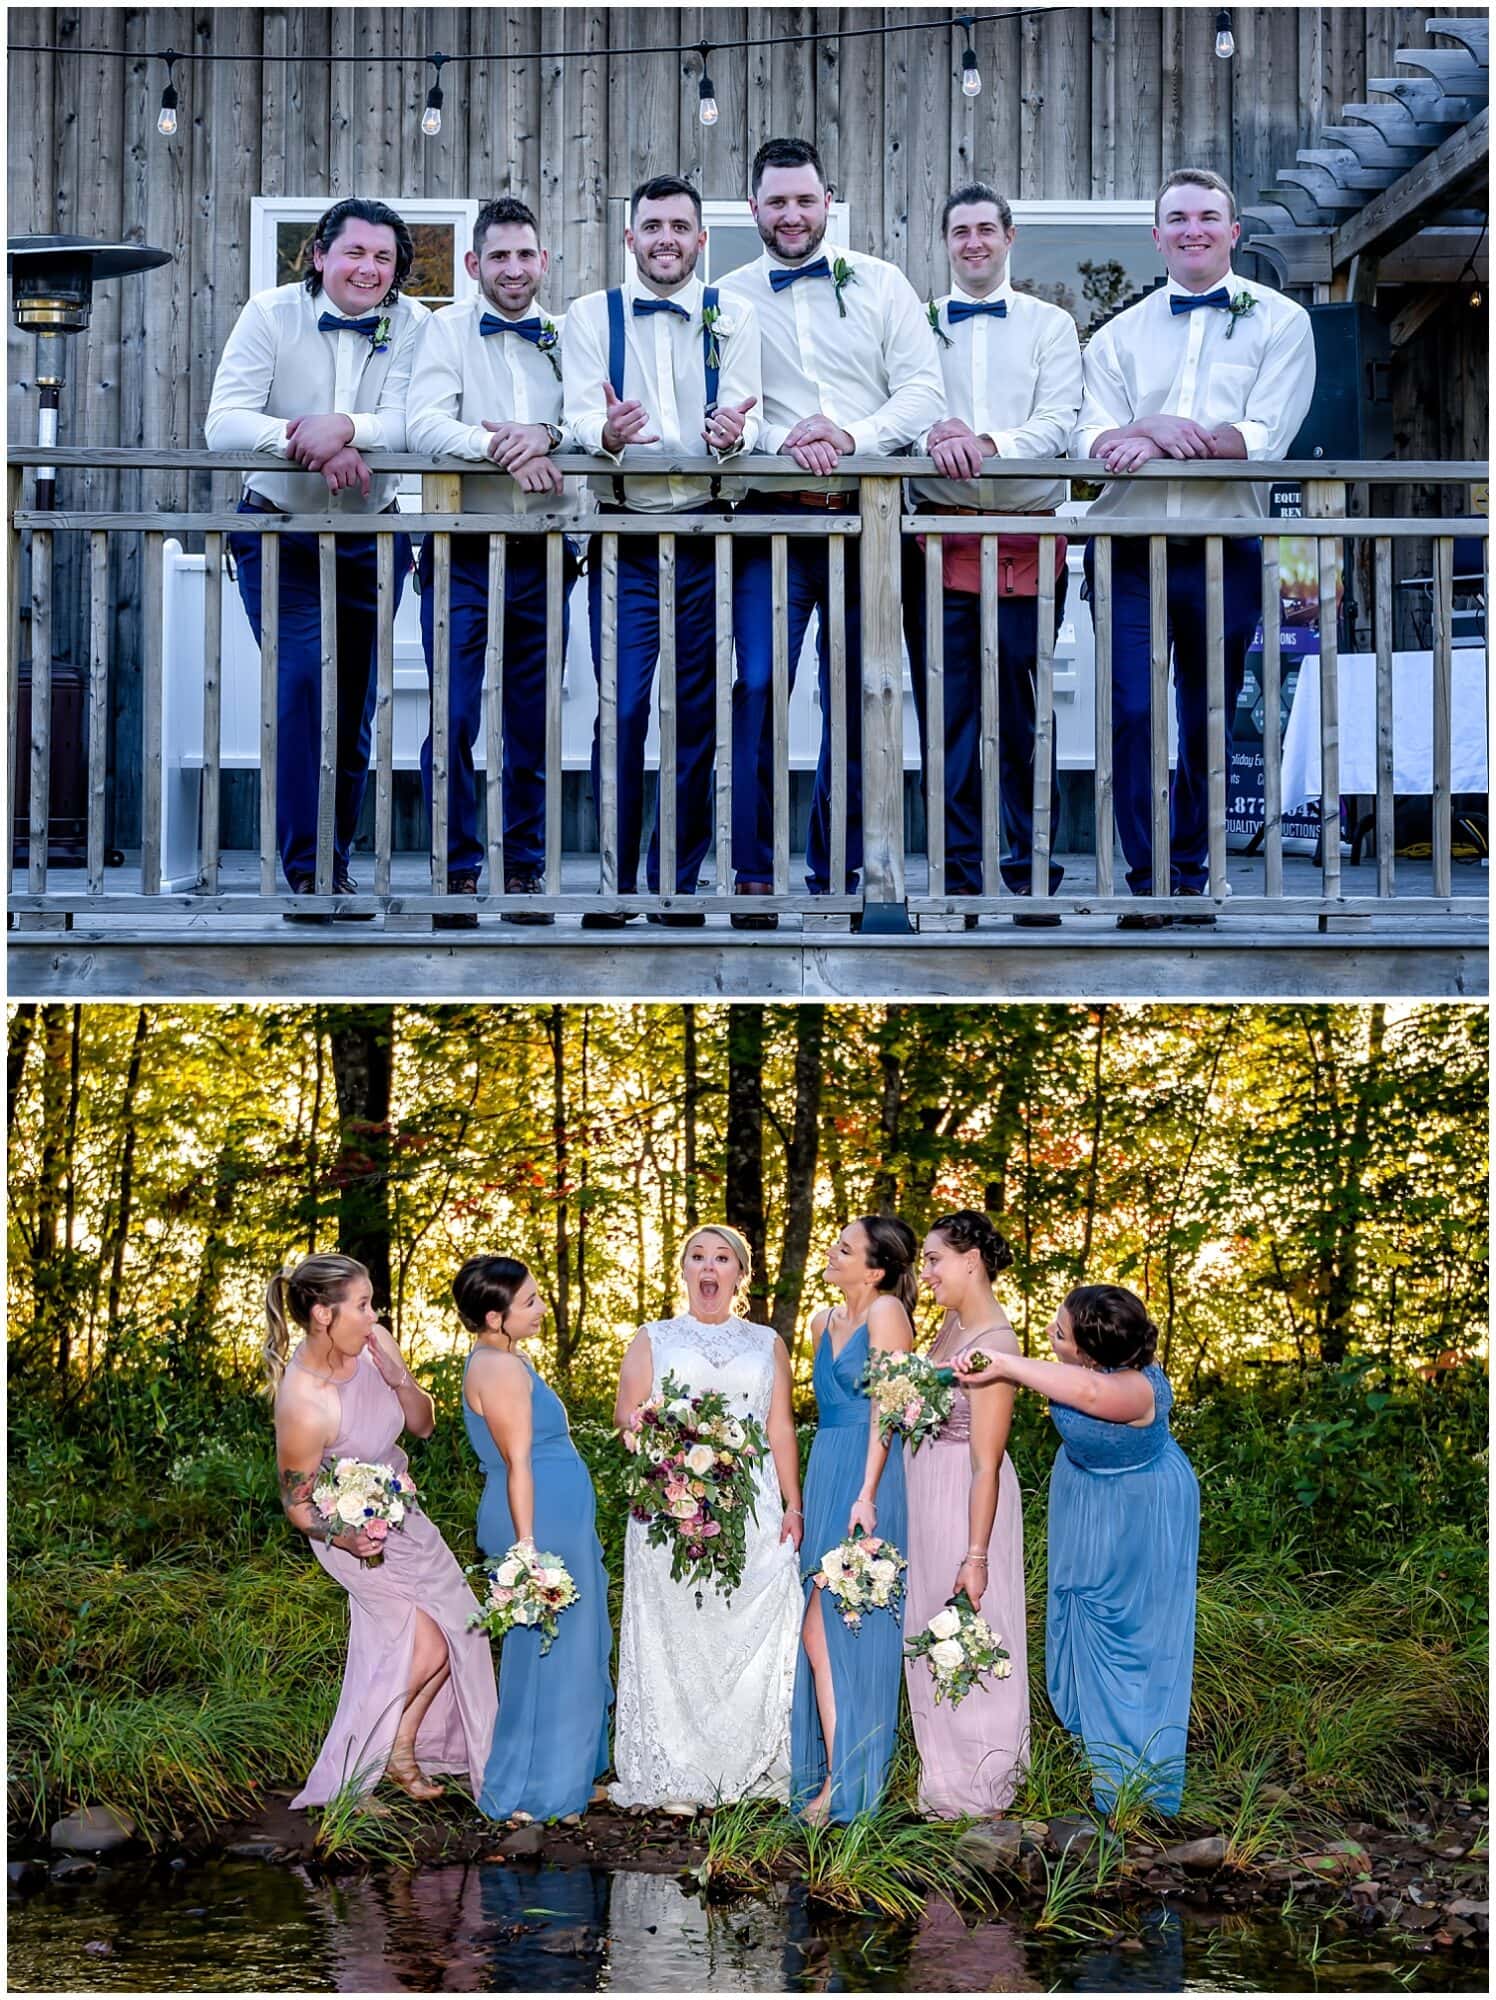 The bride poses with bridesmaids while the groom poses with his groomsmen at the Barn at Sadie Belle Farm in NS.